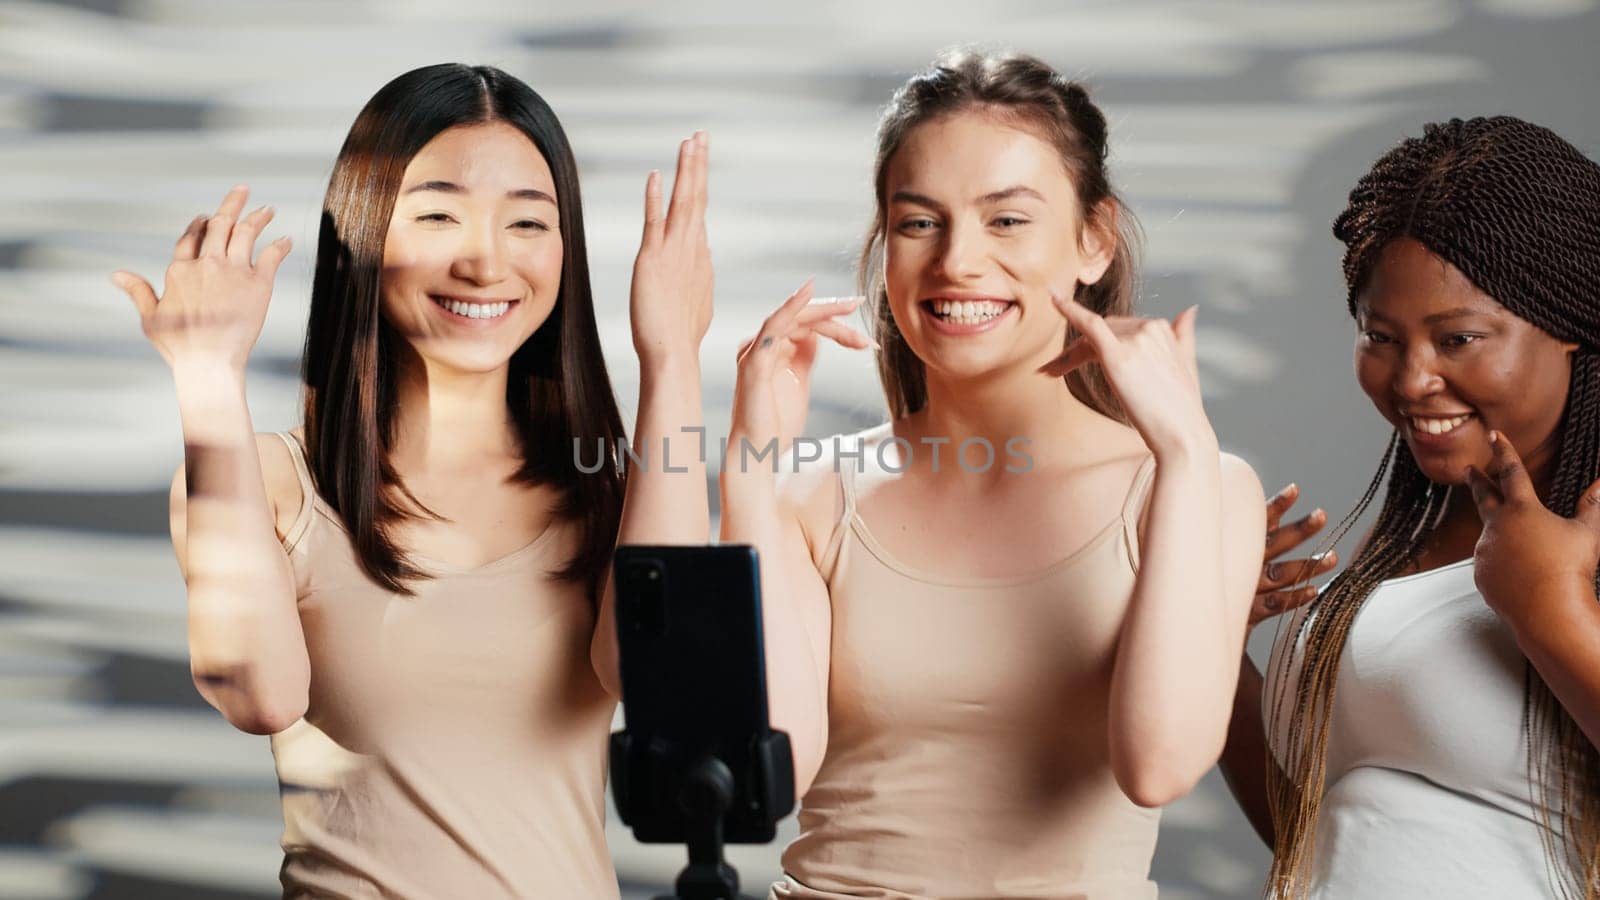 Silly beauty models dancing and having fun on camera, recording video with dance moves on smartphone and promoting self confidence. Happy beautiful women embracing imperfections.